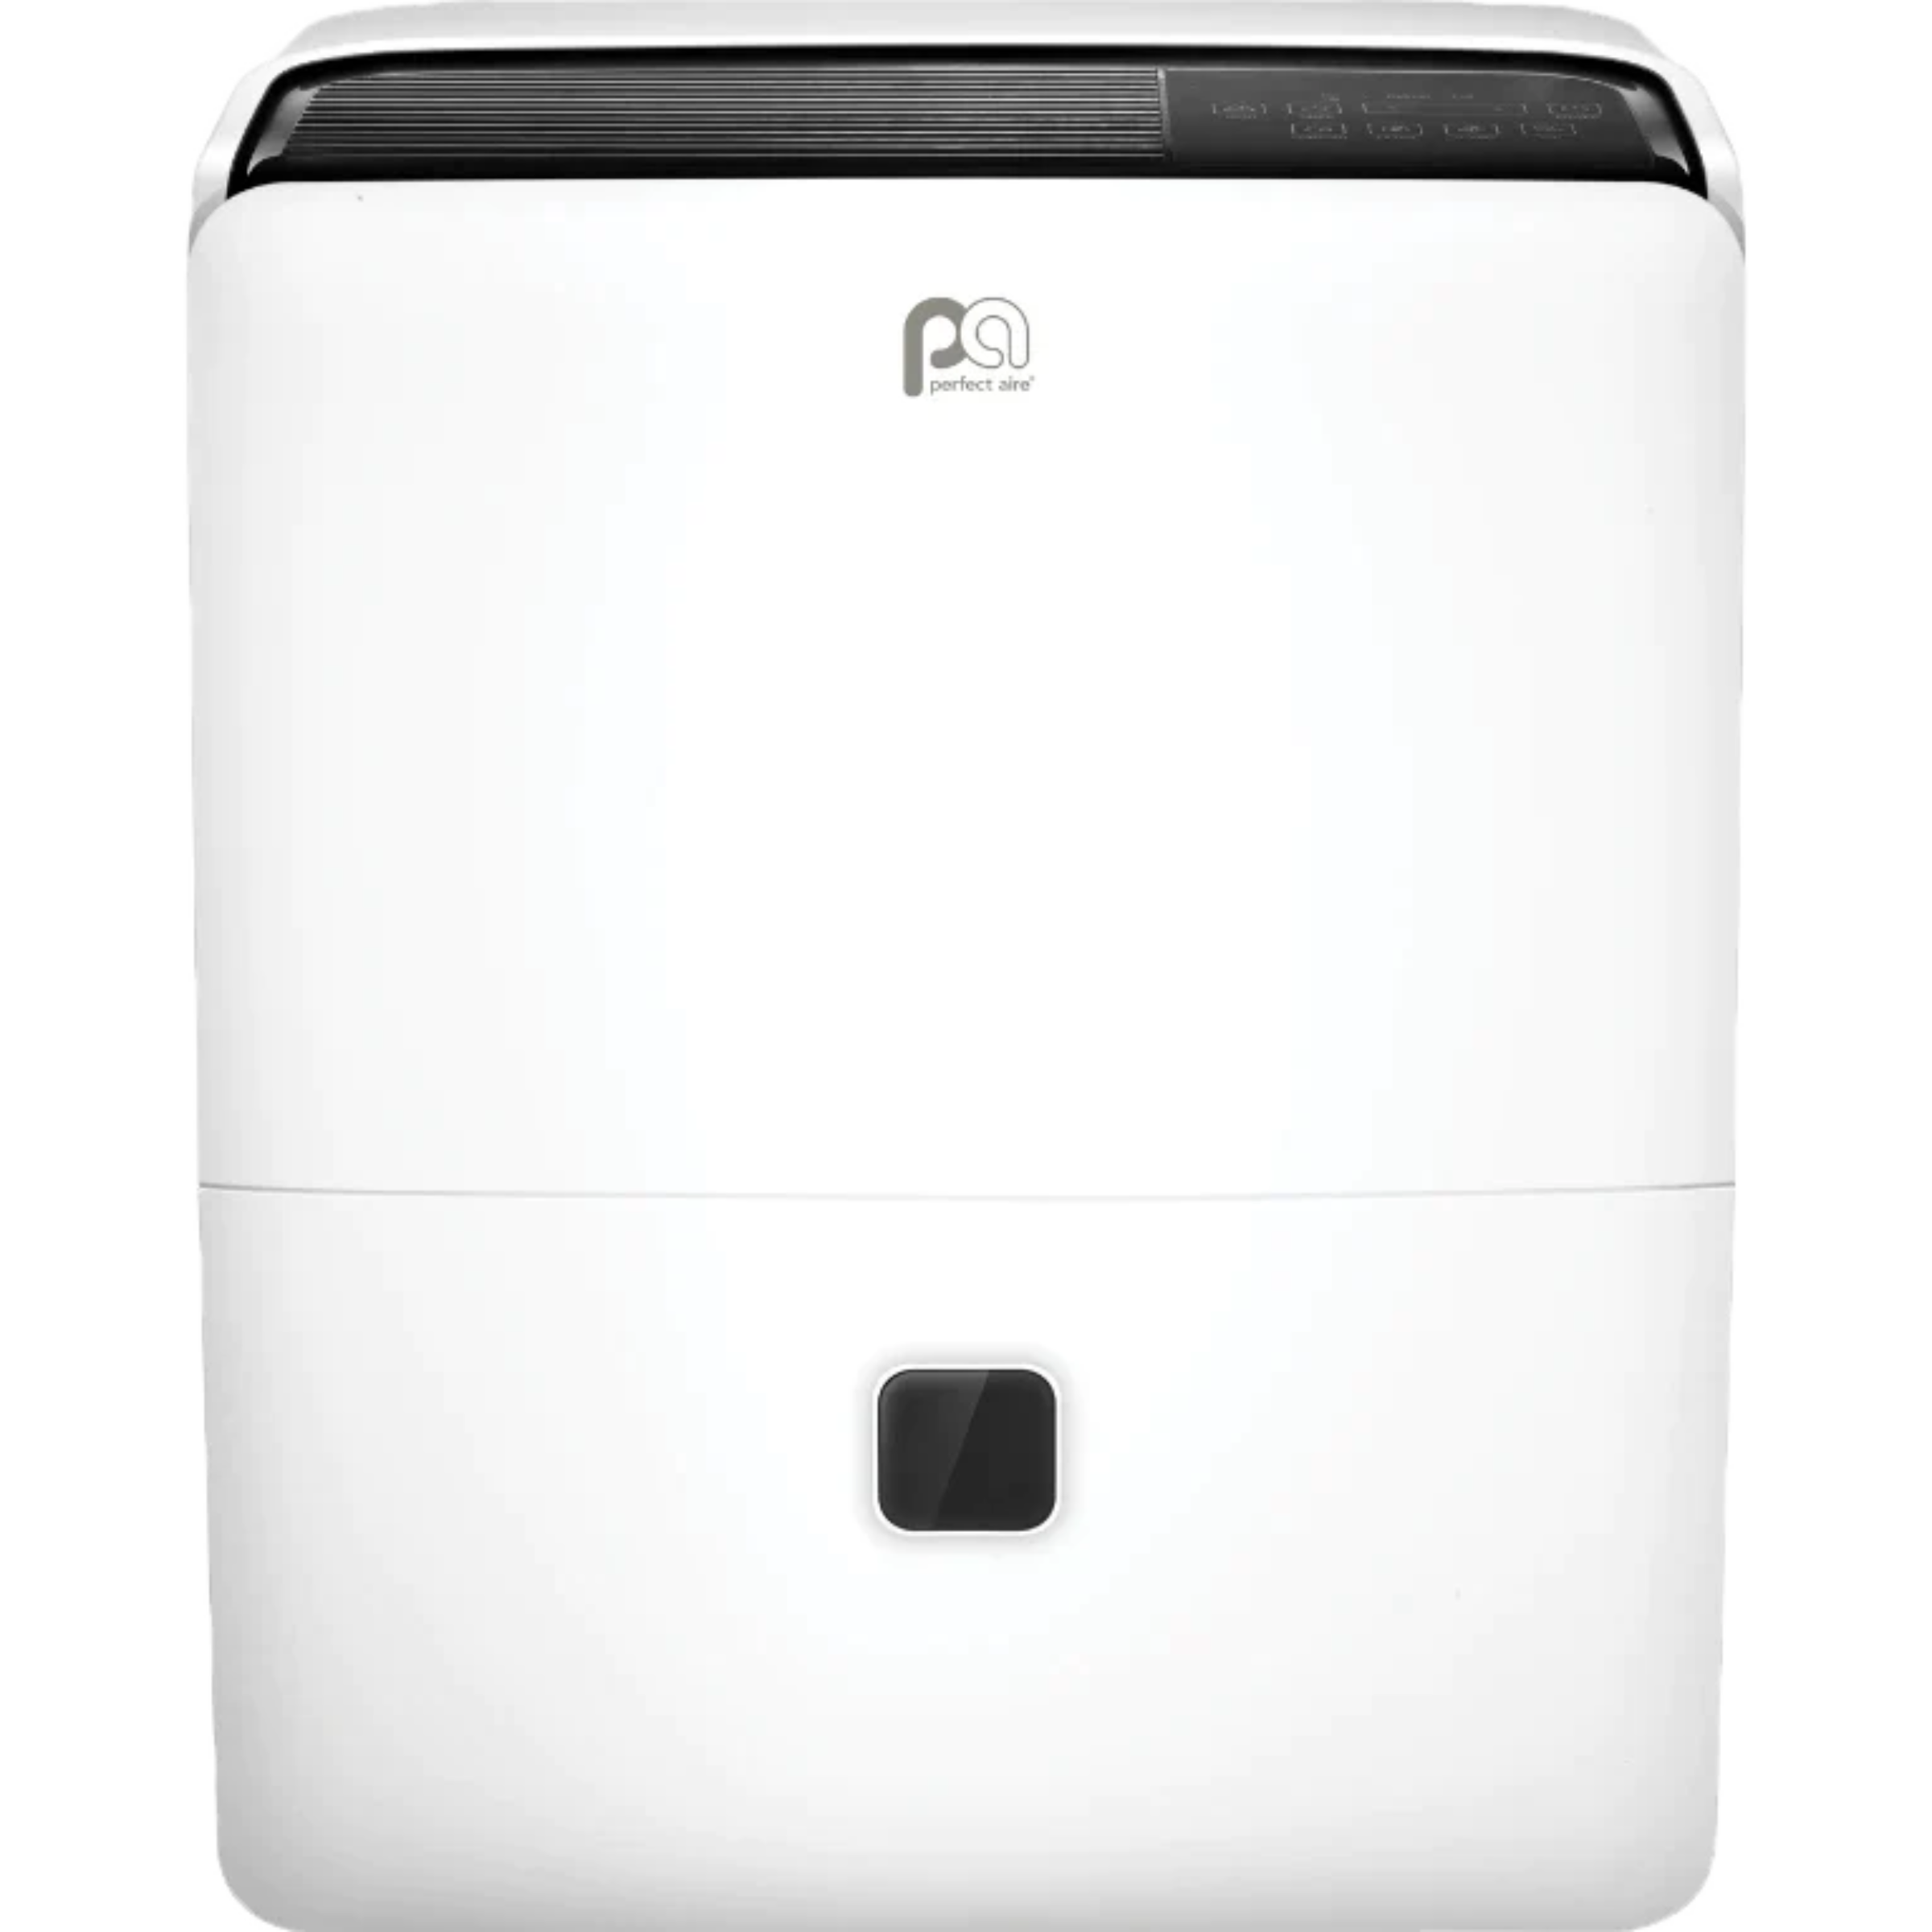 PerfectAire-Dehumidifier-With Pump-1PDP60, 60-Pint Dehumidifier with Pump, up to 5,000 sq. ft